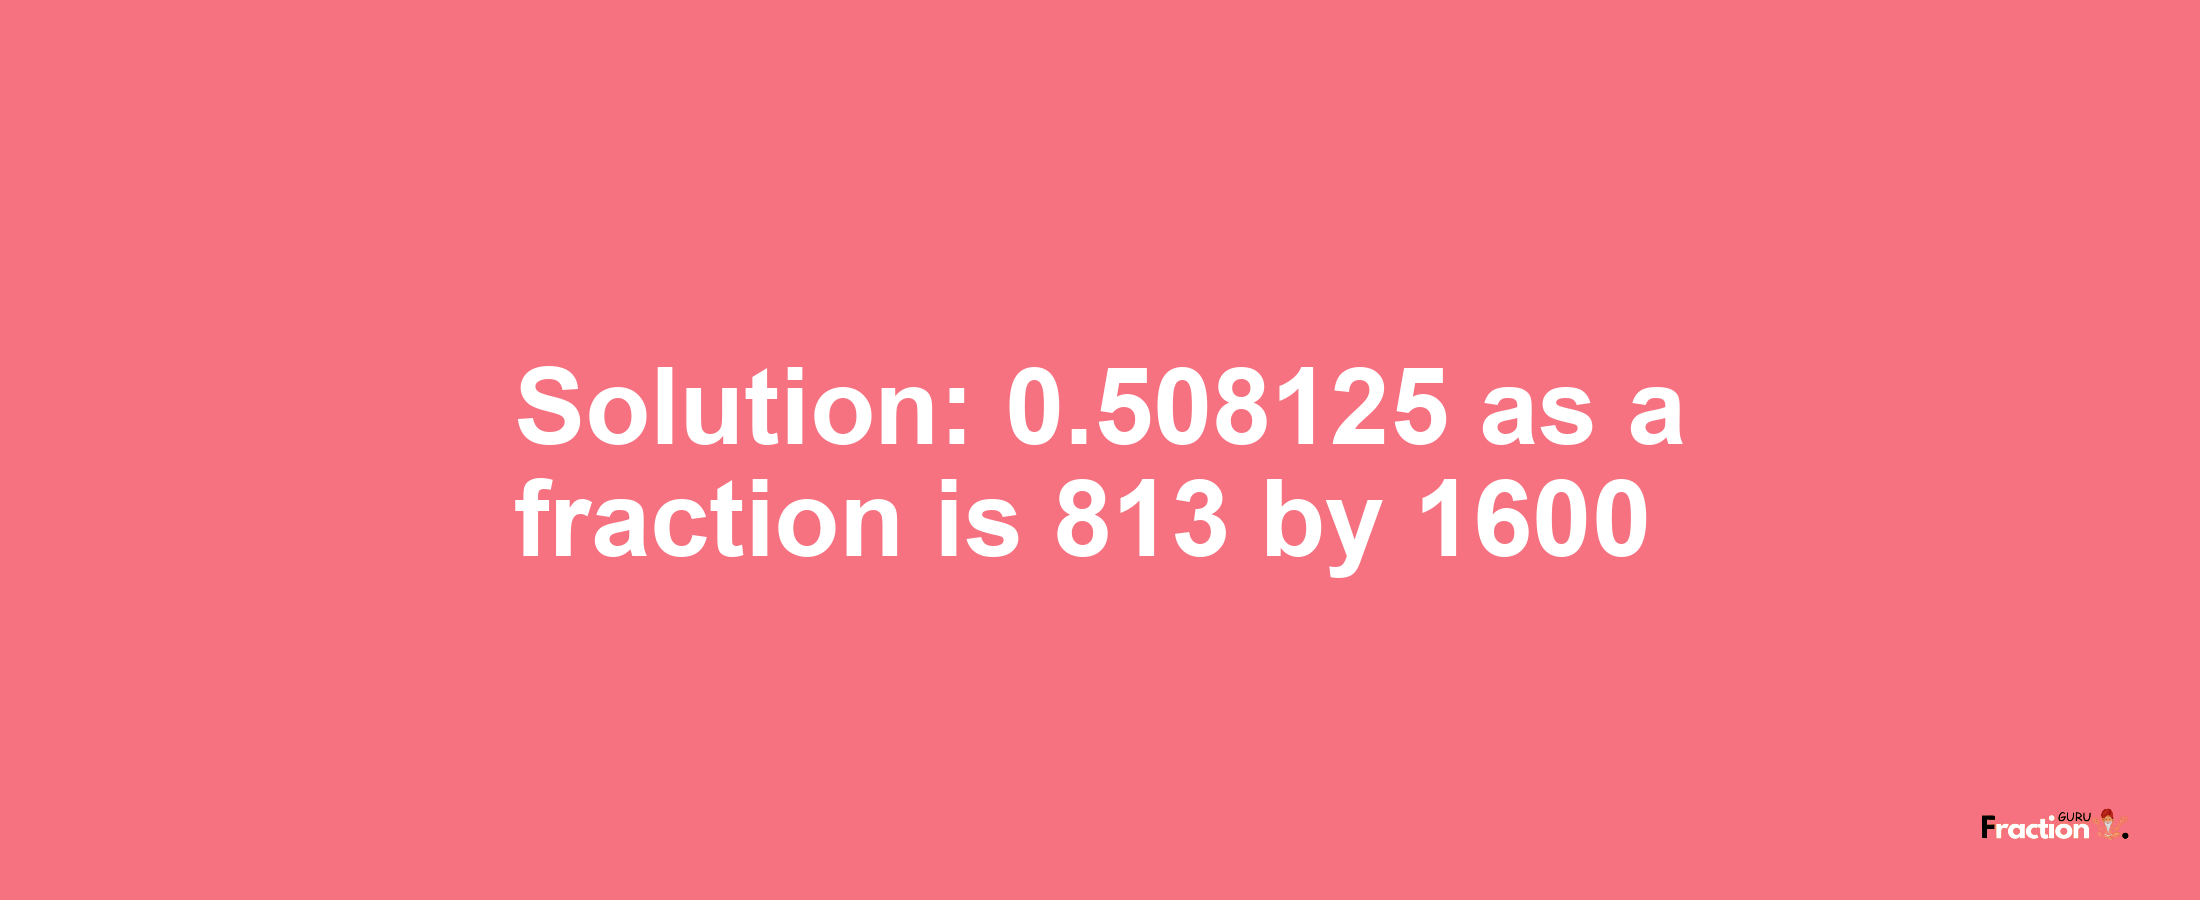 Solution:0.508125 as a fraction is 813/1600